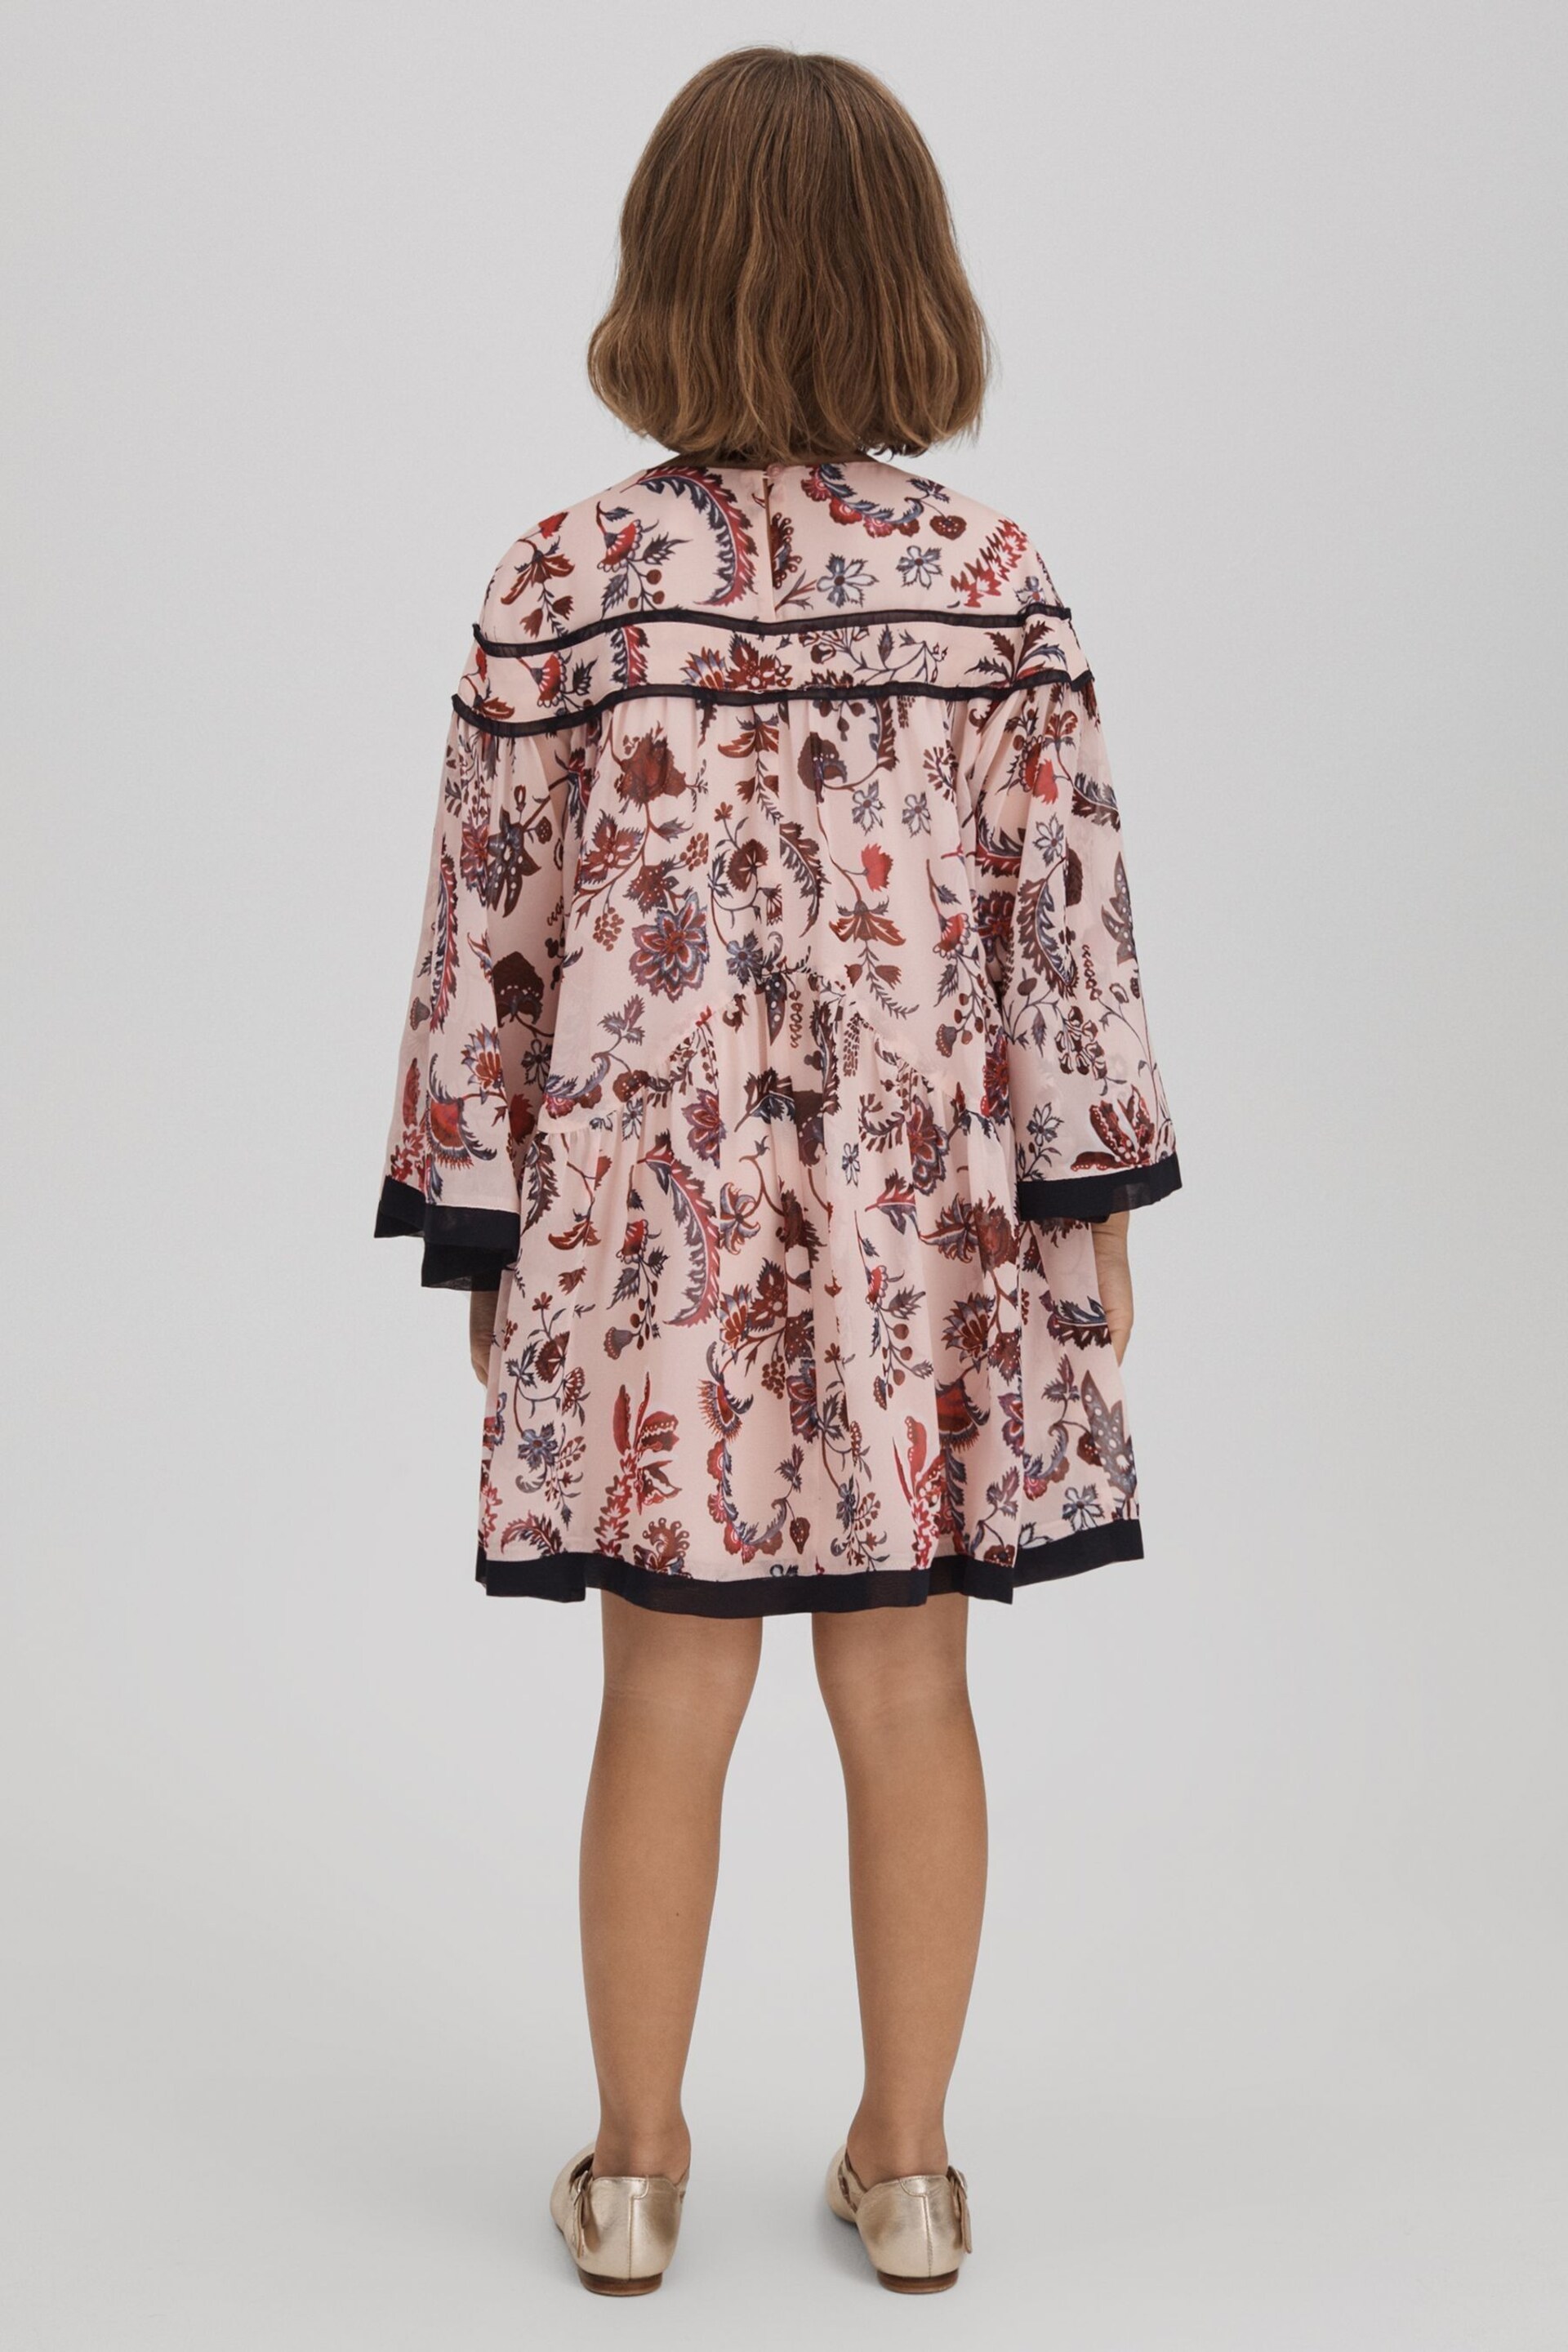 Reiss Pink Talitha Teen Printed Bell Sleeve Tiered Dress - Image 5 of 6